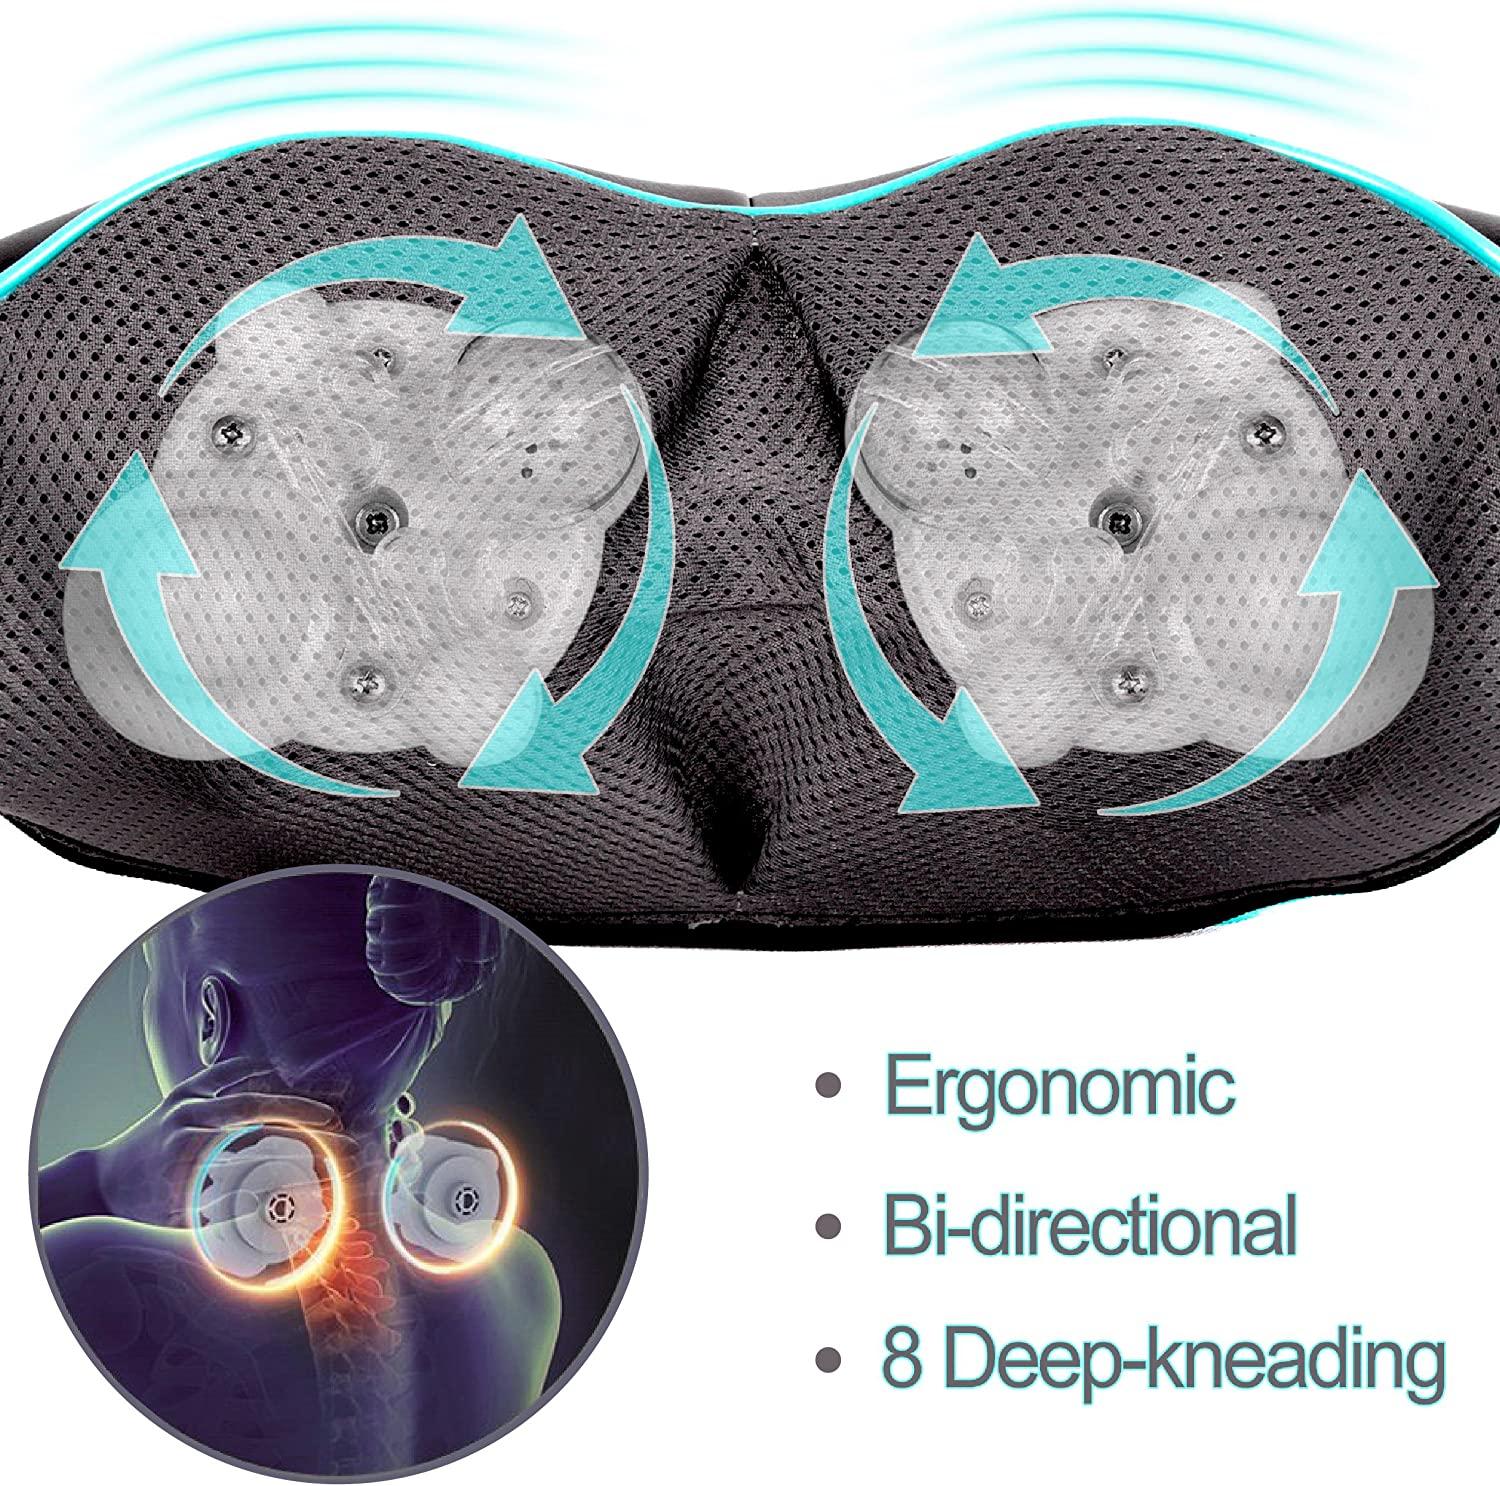  Blue Elf Shiatsu Neck Massager, Shiatsu Back Shoulder Massager  with Heat, Electric Kneading Massage Pillow for Back,Shoulder, Foot, Leg  Muscles Pain Relief Relax in Car, Office and Home : Health 